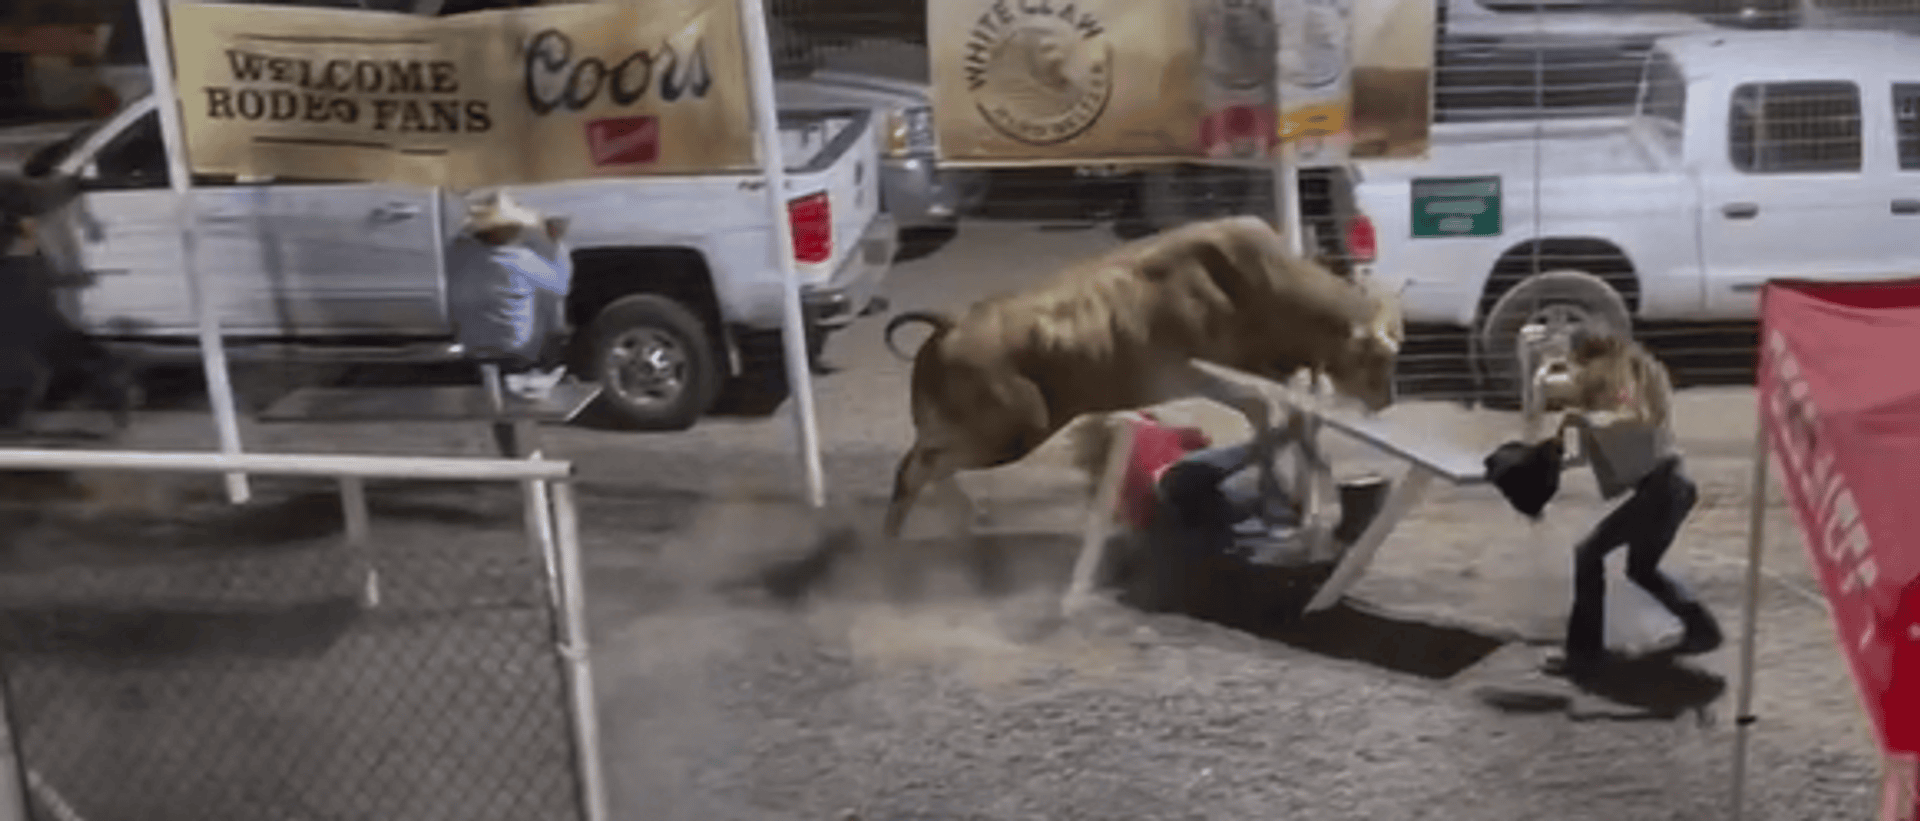 Bull Party Bus Leaps into Oregon Rodeo Crowd, Causing Chaos and Injuries